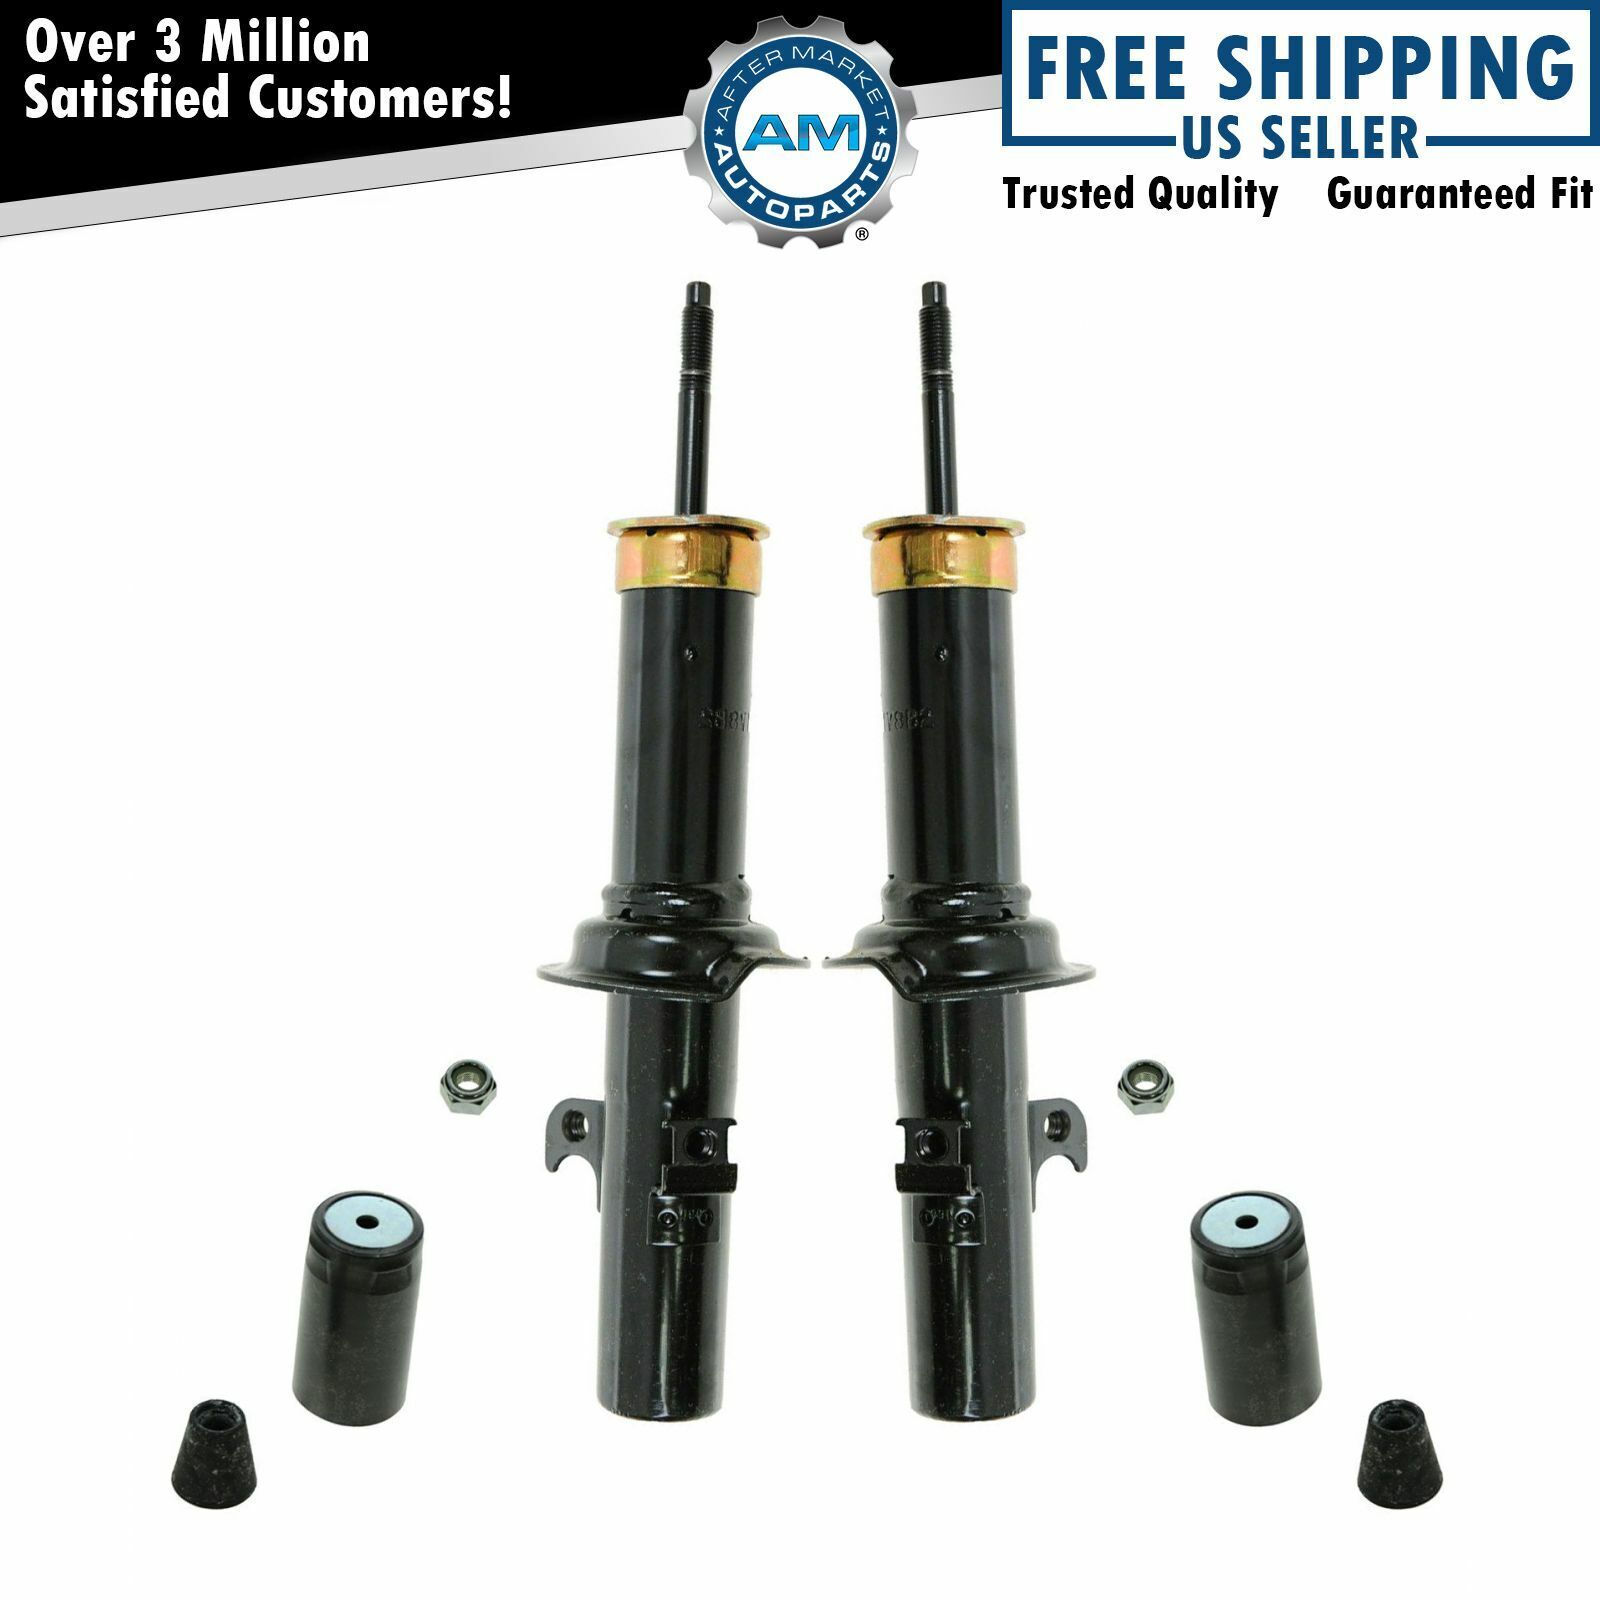 MONROE 71829 OE Spectrum Front Shock Strut Pair Set of 2 for Accord Prelude